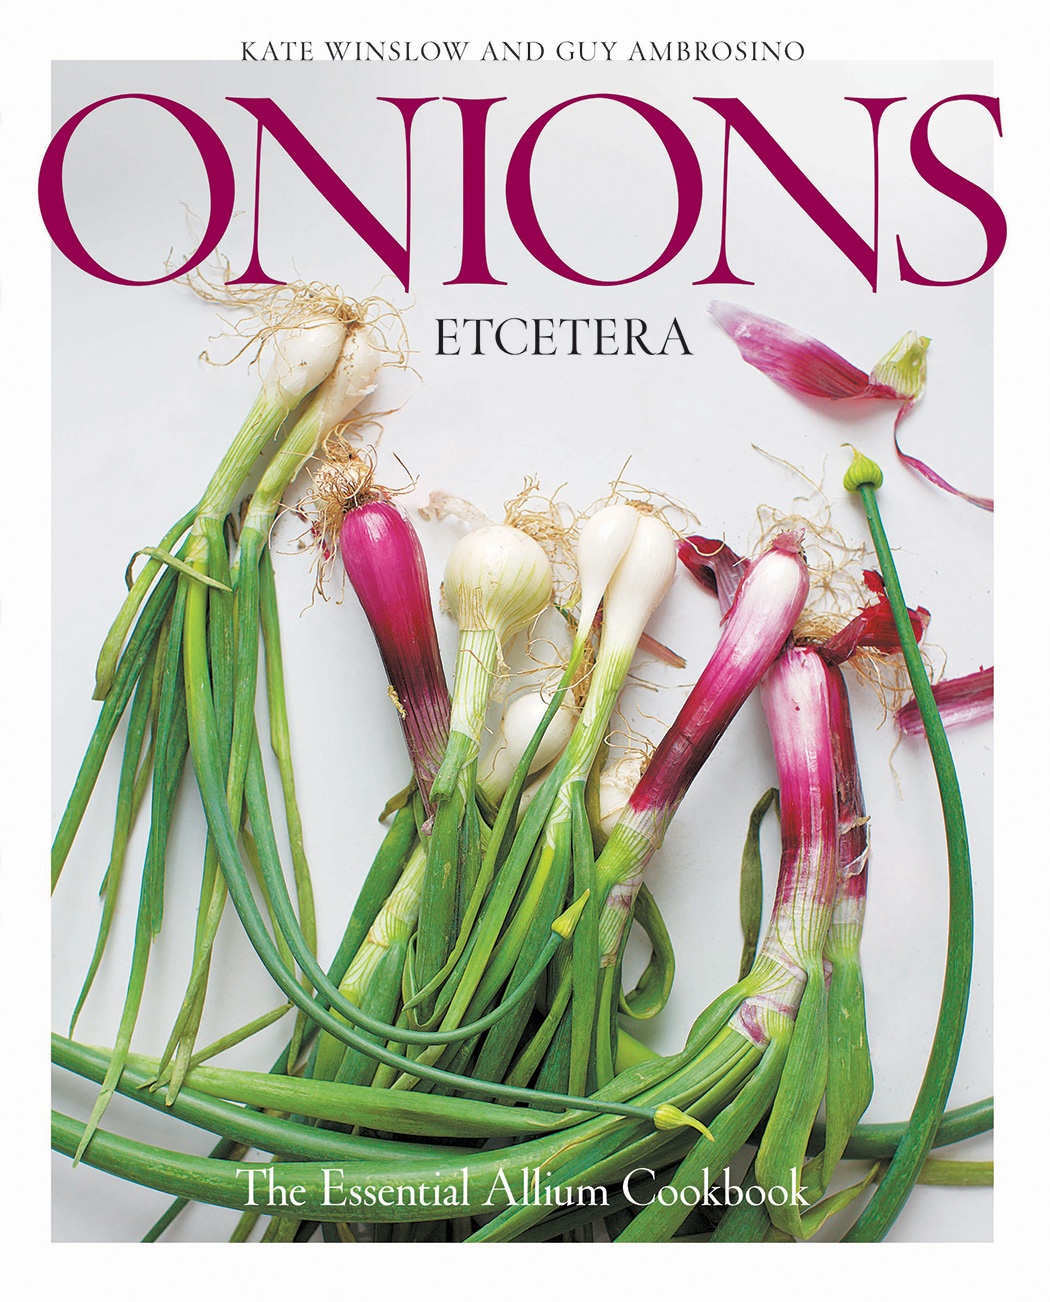 Book cover of Onions Etcetera by Kate Winslow and Guy Ambrosino